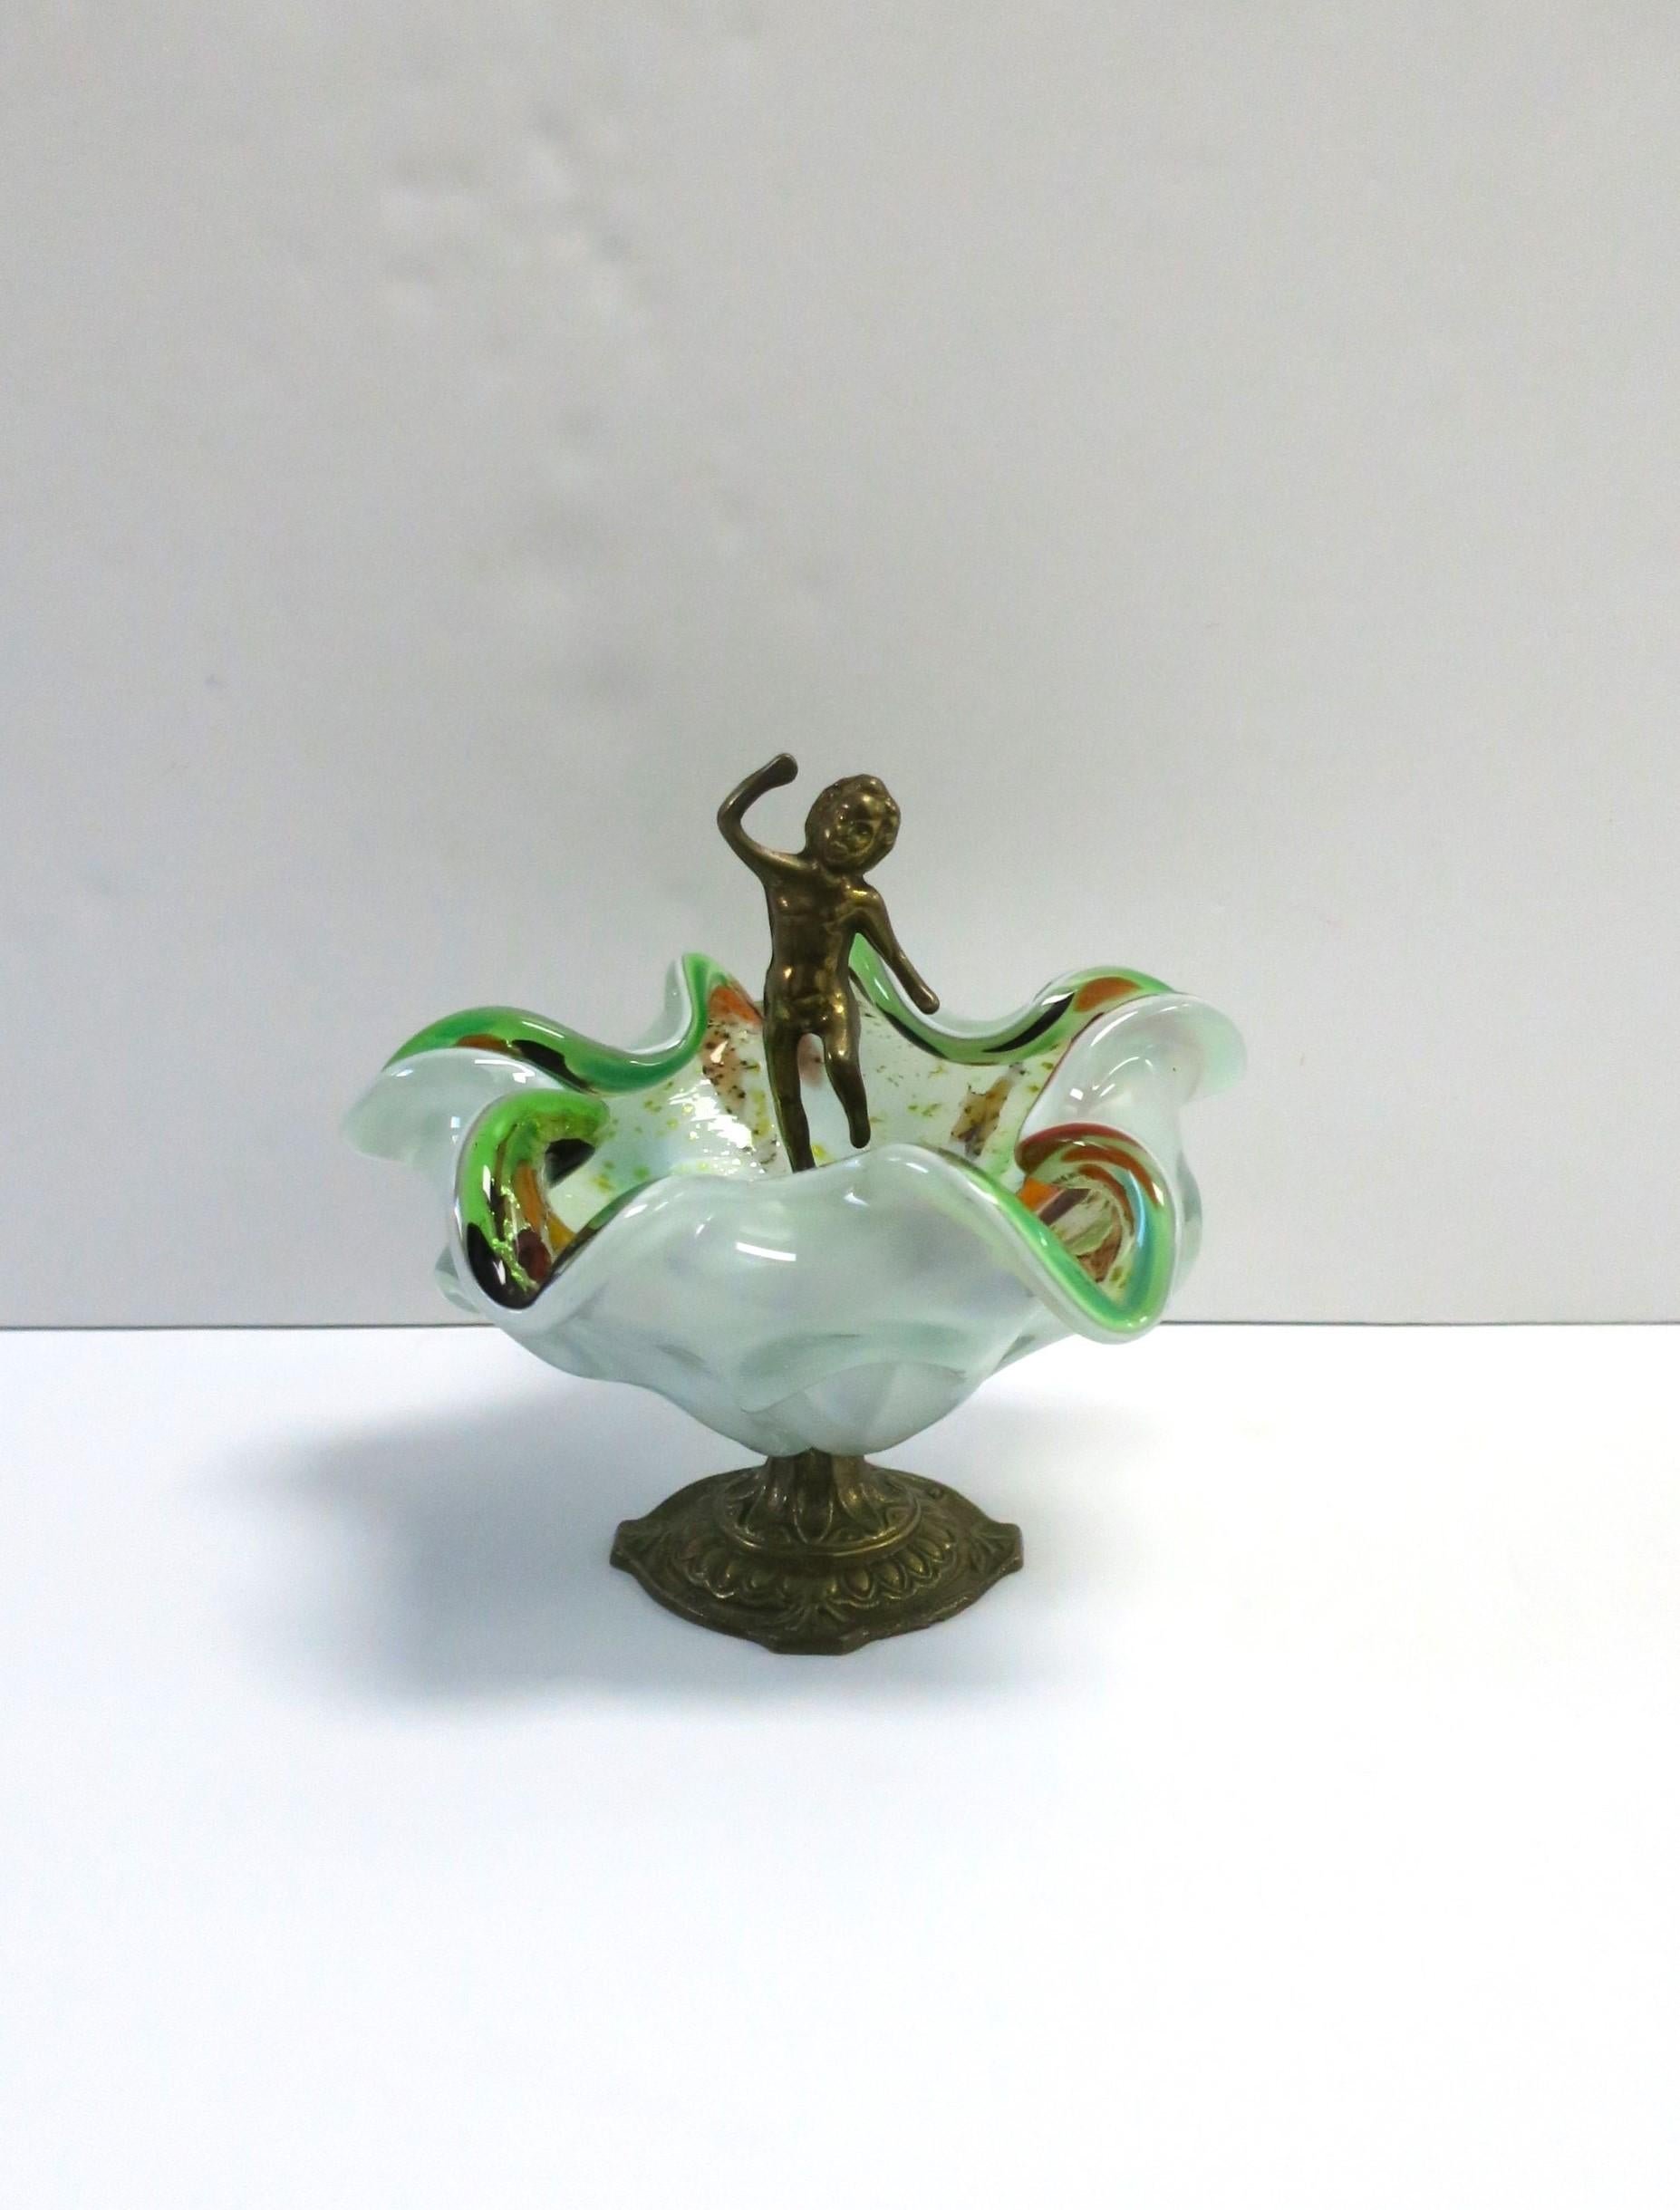 An Italian Murano art glass bowl with brass nude male figure, circa mid-20th century, Italy. This Murano bowl has a wavey soft edge with bright green and orange hues, hints of gold, brown and light blue splashes of art glass. A brass nude male